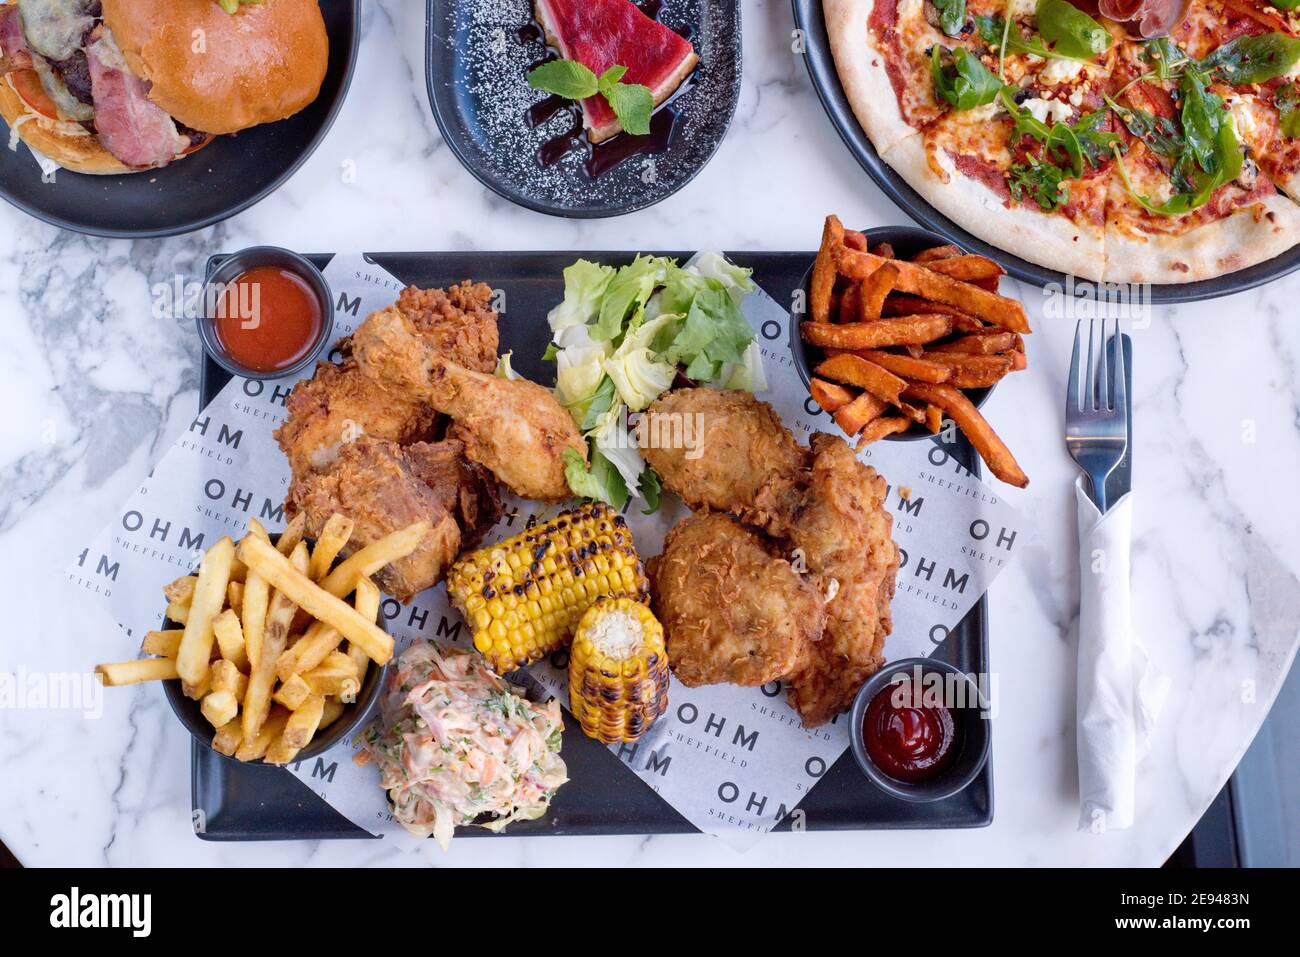 Sheffield, UK - 03 Aug 2017: Southern fried chicken and fries, pizza, cheesecake and more American diner food at OHM, Fitzwilliam Street Stock Photo